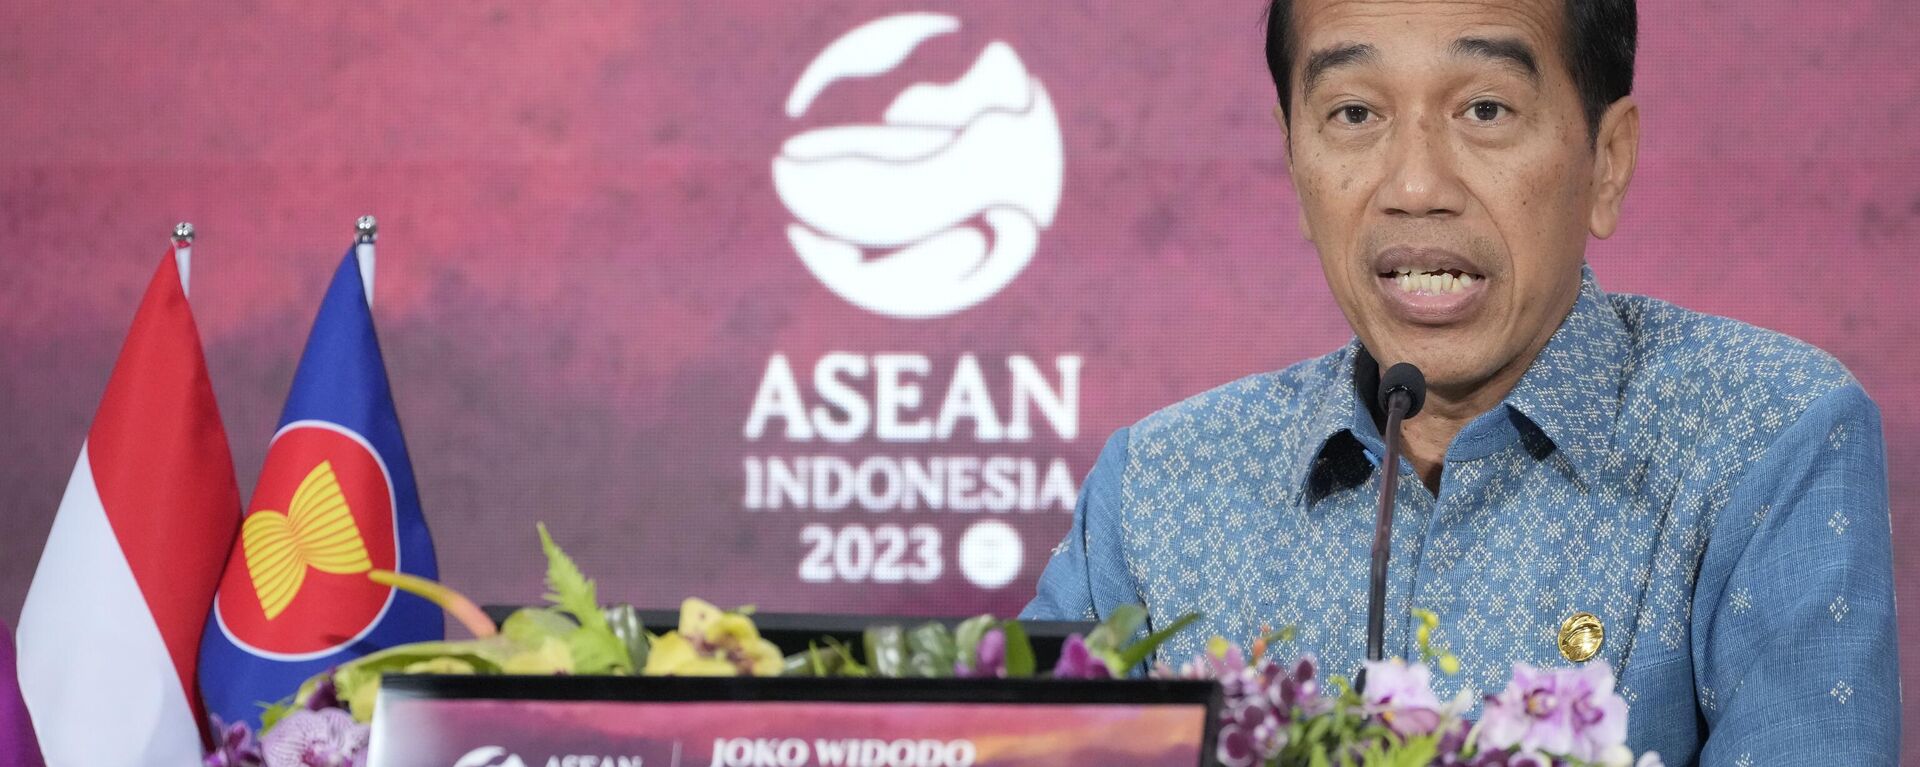 Indonesian President Joko Widodo gestures during a press conference at the 42nd ASEAN Summit in Labuan Bajo, East Nusa Tenggara province, Indonesia, Thursday, May 11, 2023. - Sputnik India, 1920, 11.05.2023